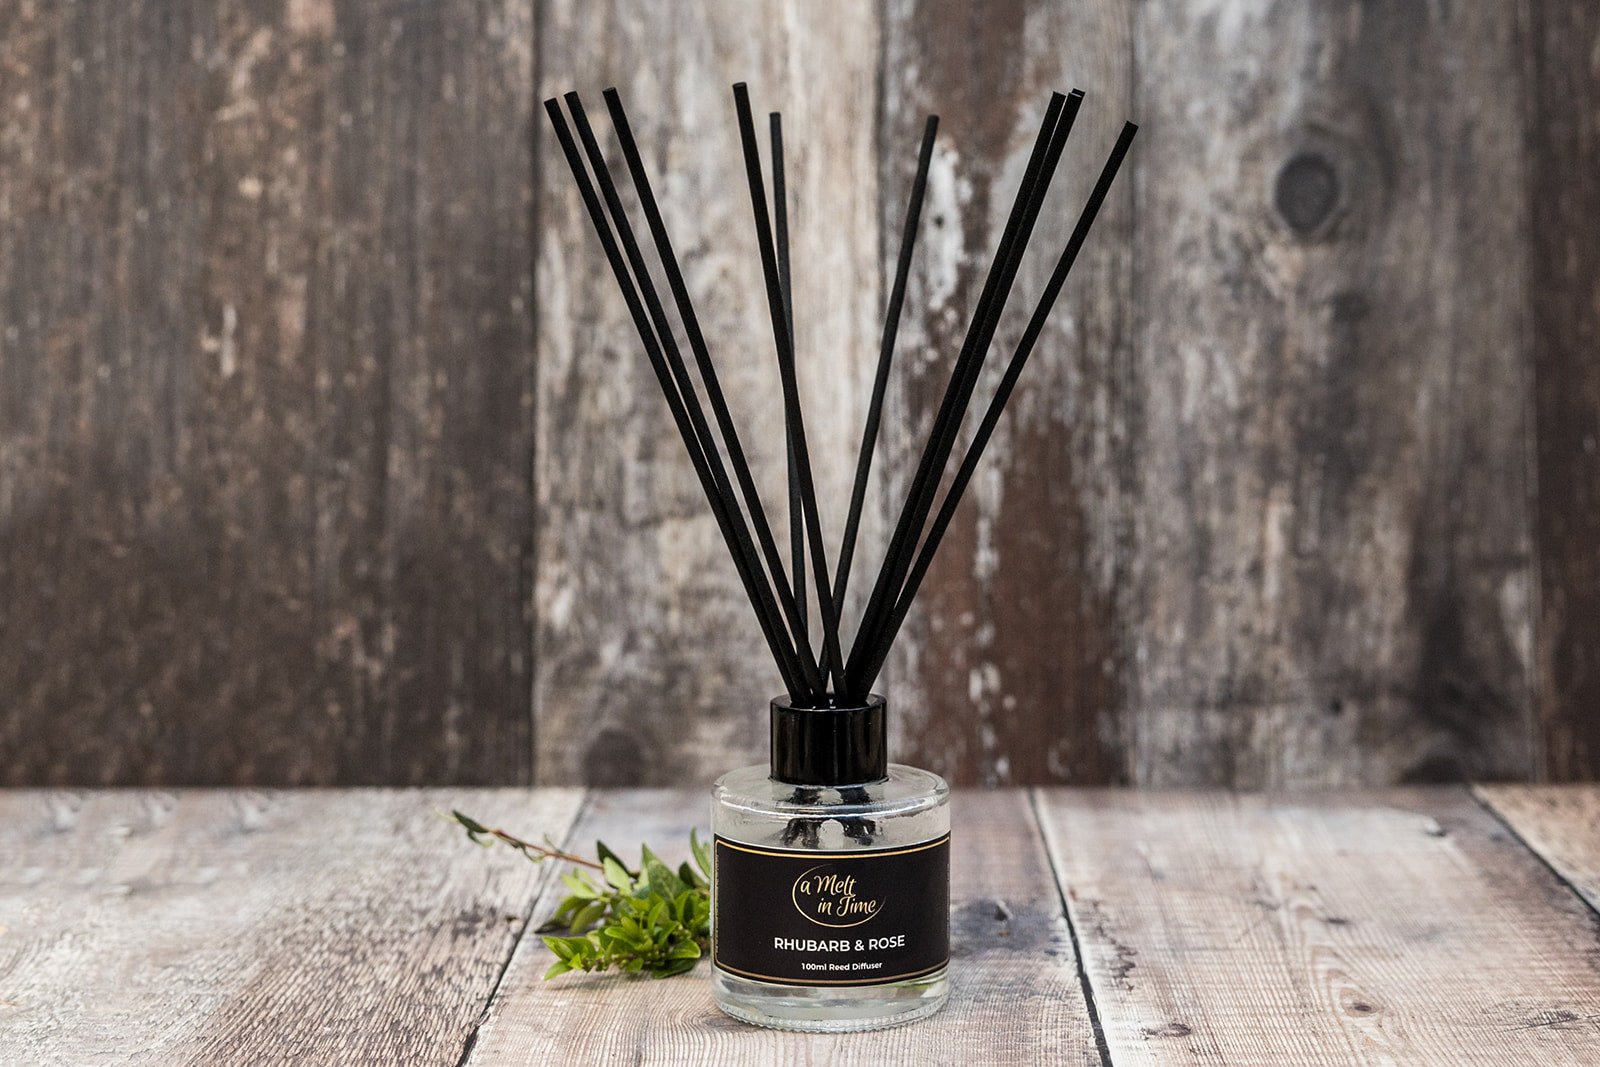 Rhubarb And Rose Luxury Reed Diffuser - A Melt In Time Ltd